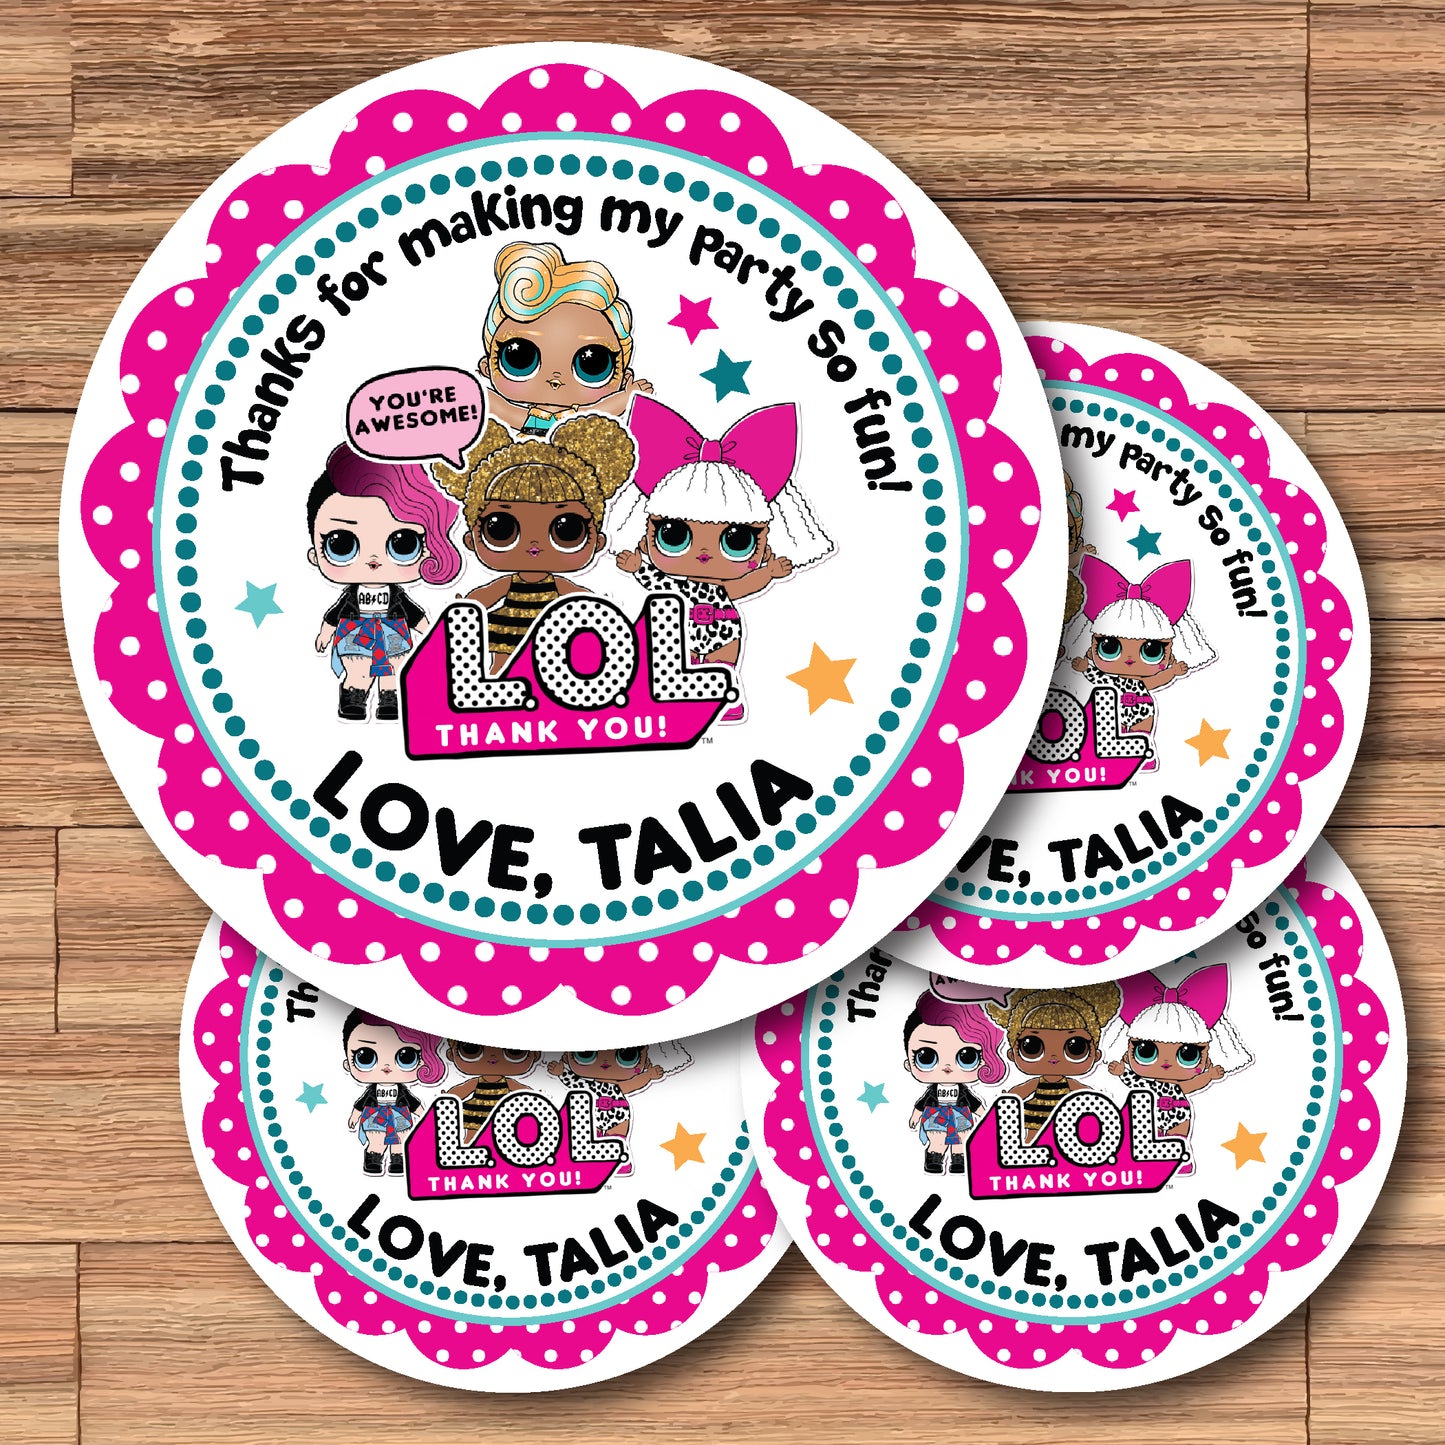 LOL DOLLS Custom Personalized Stickers for Gift Bags, Party Favors! Printed or Digital!